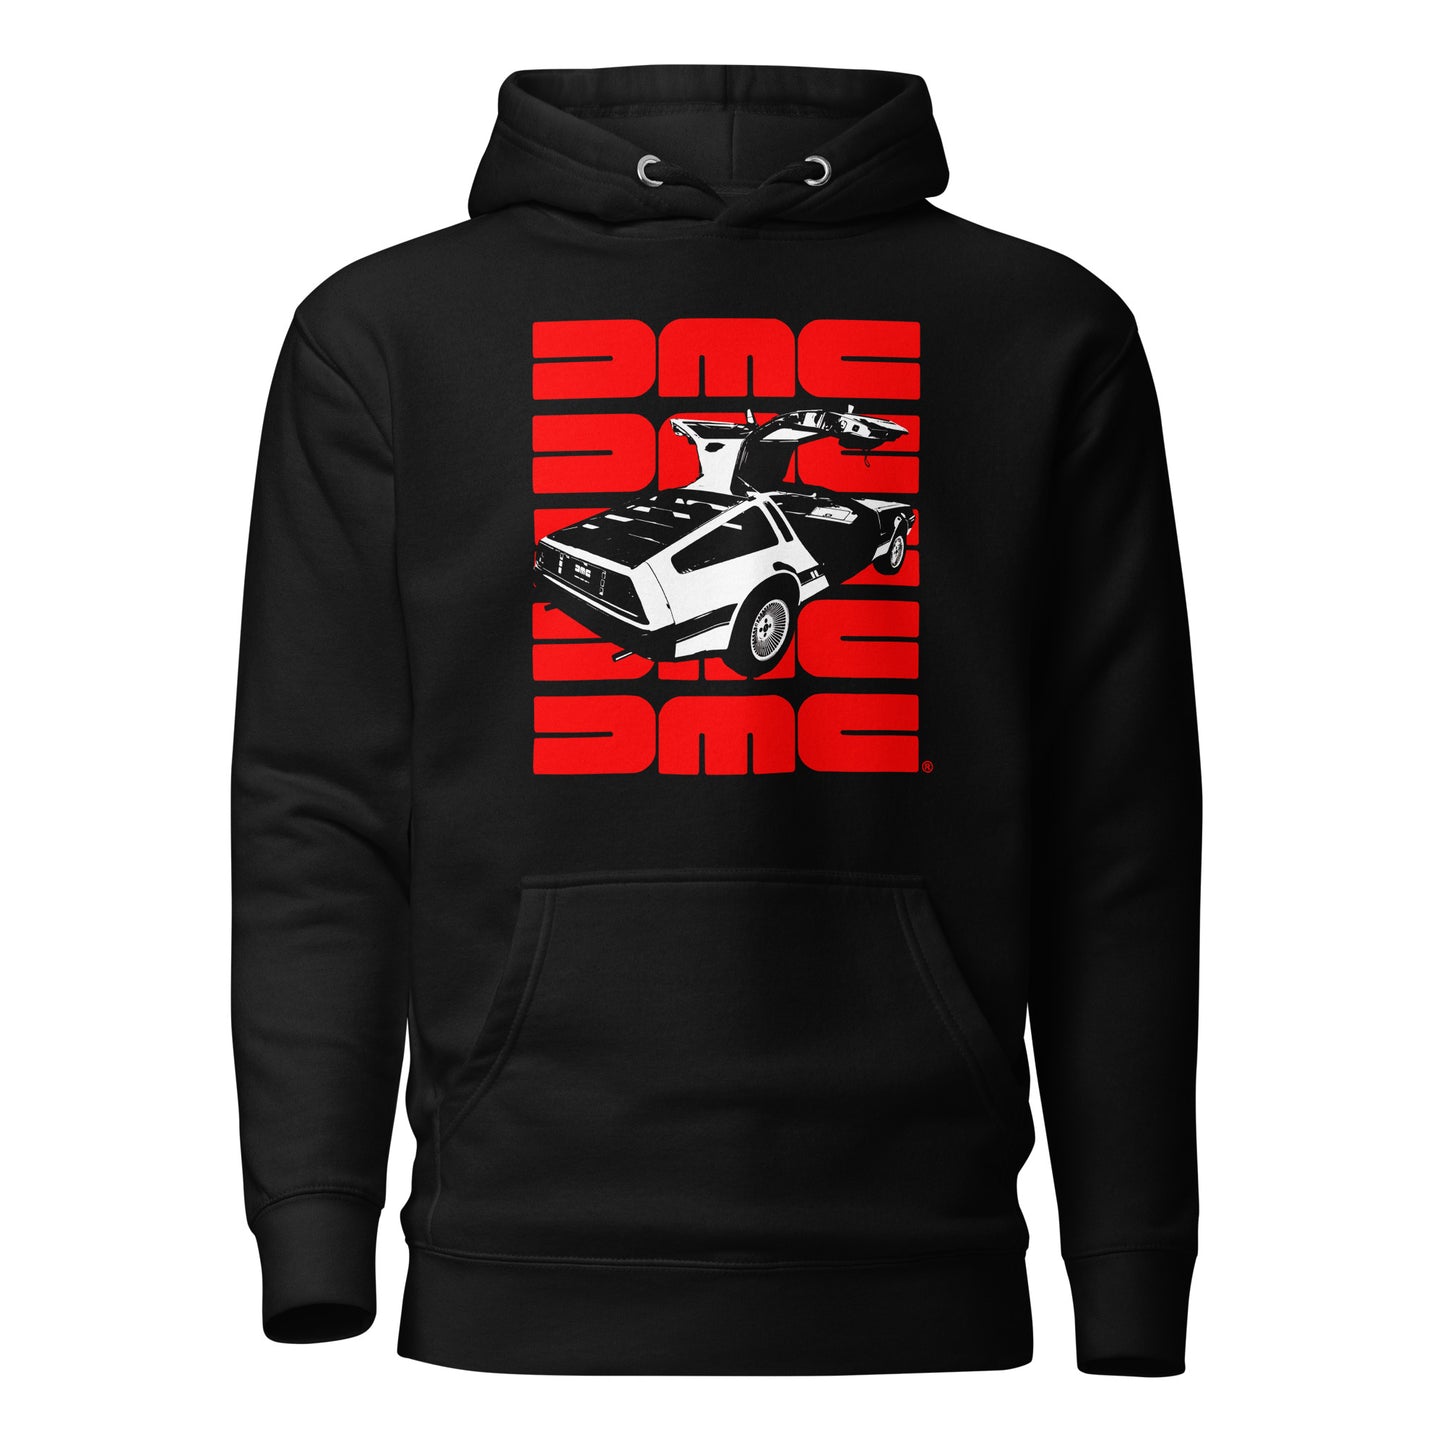 Black, White, and Red All Over (Blackout Edition) Hoodie